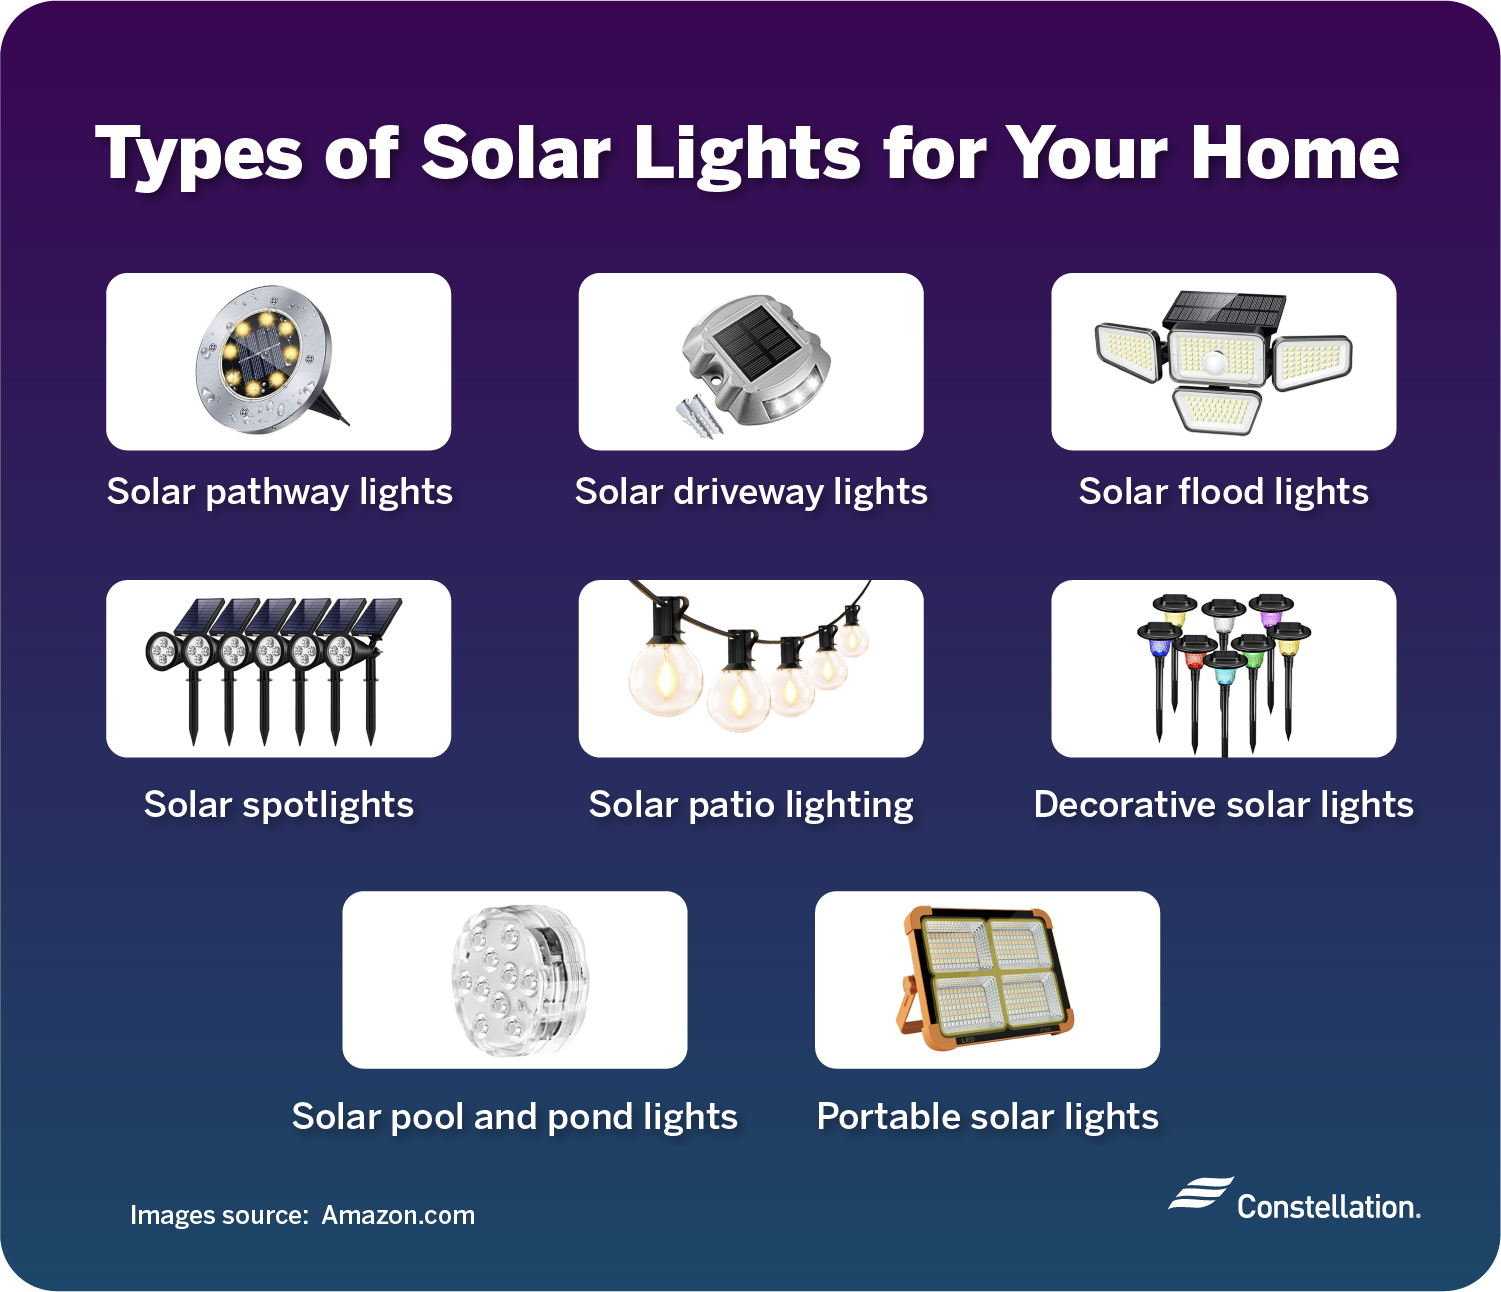 Different types of solar lights for your home.